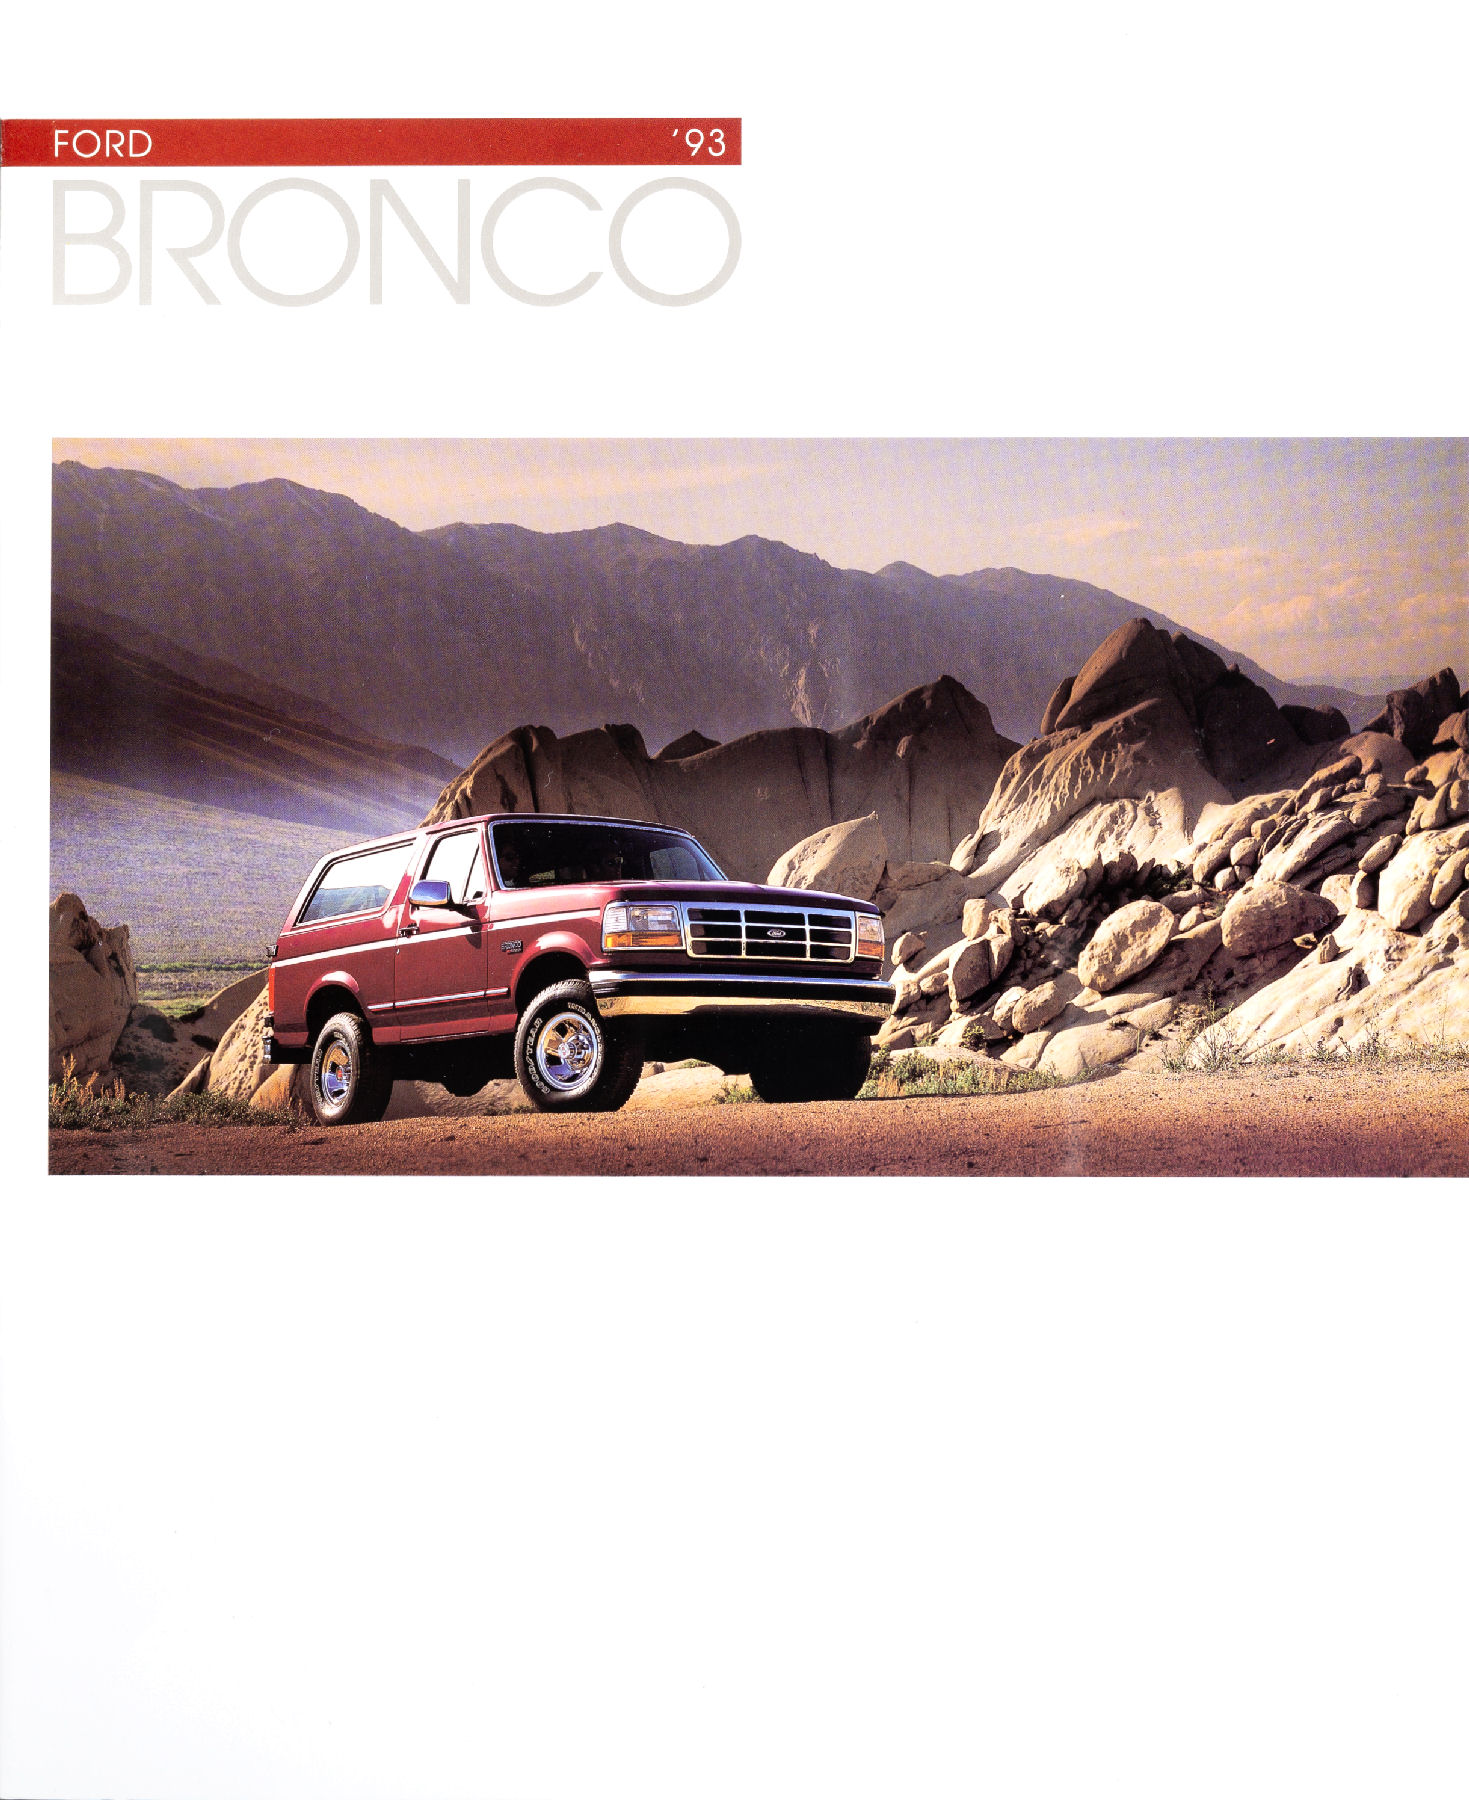 1993 Ford Bronco-01